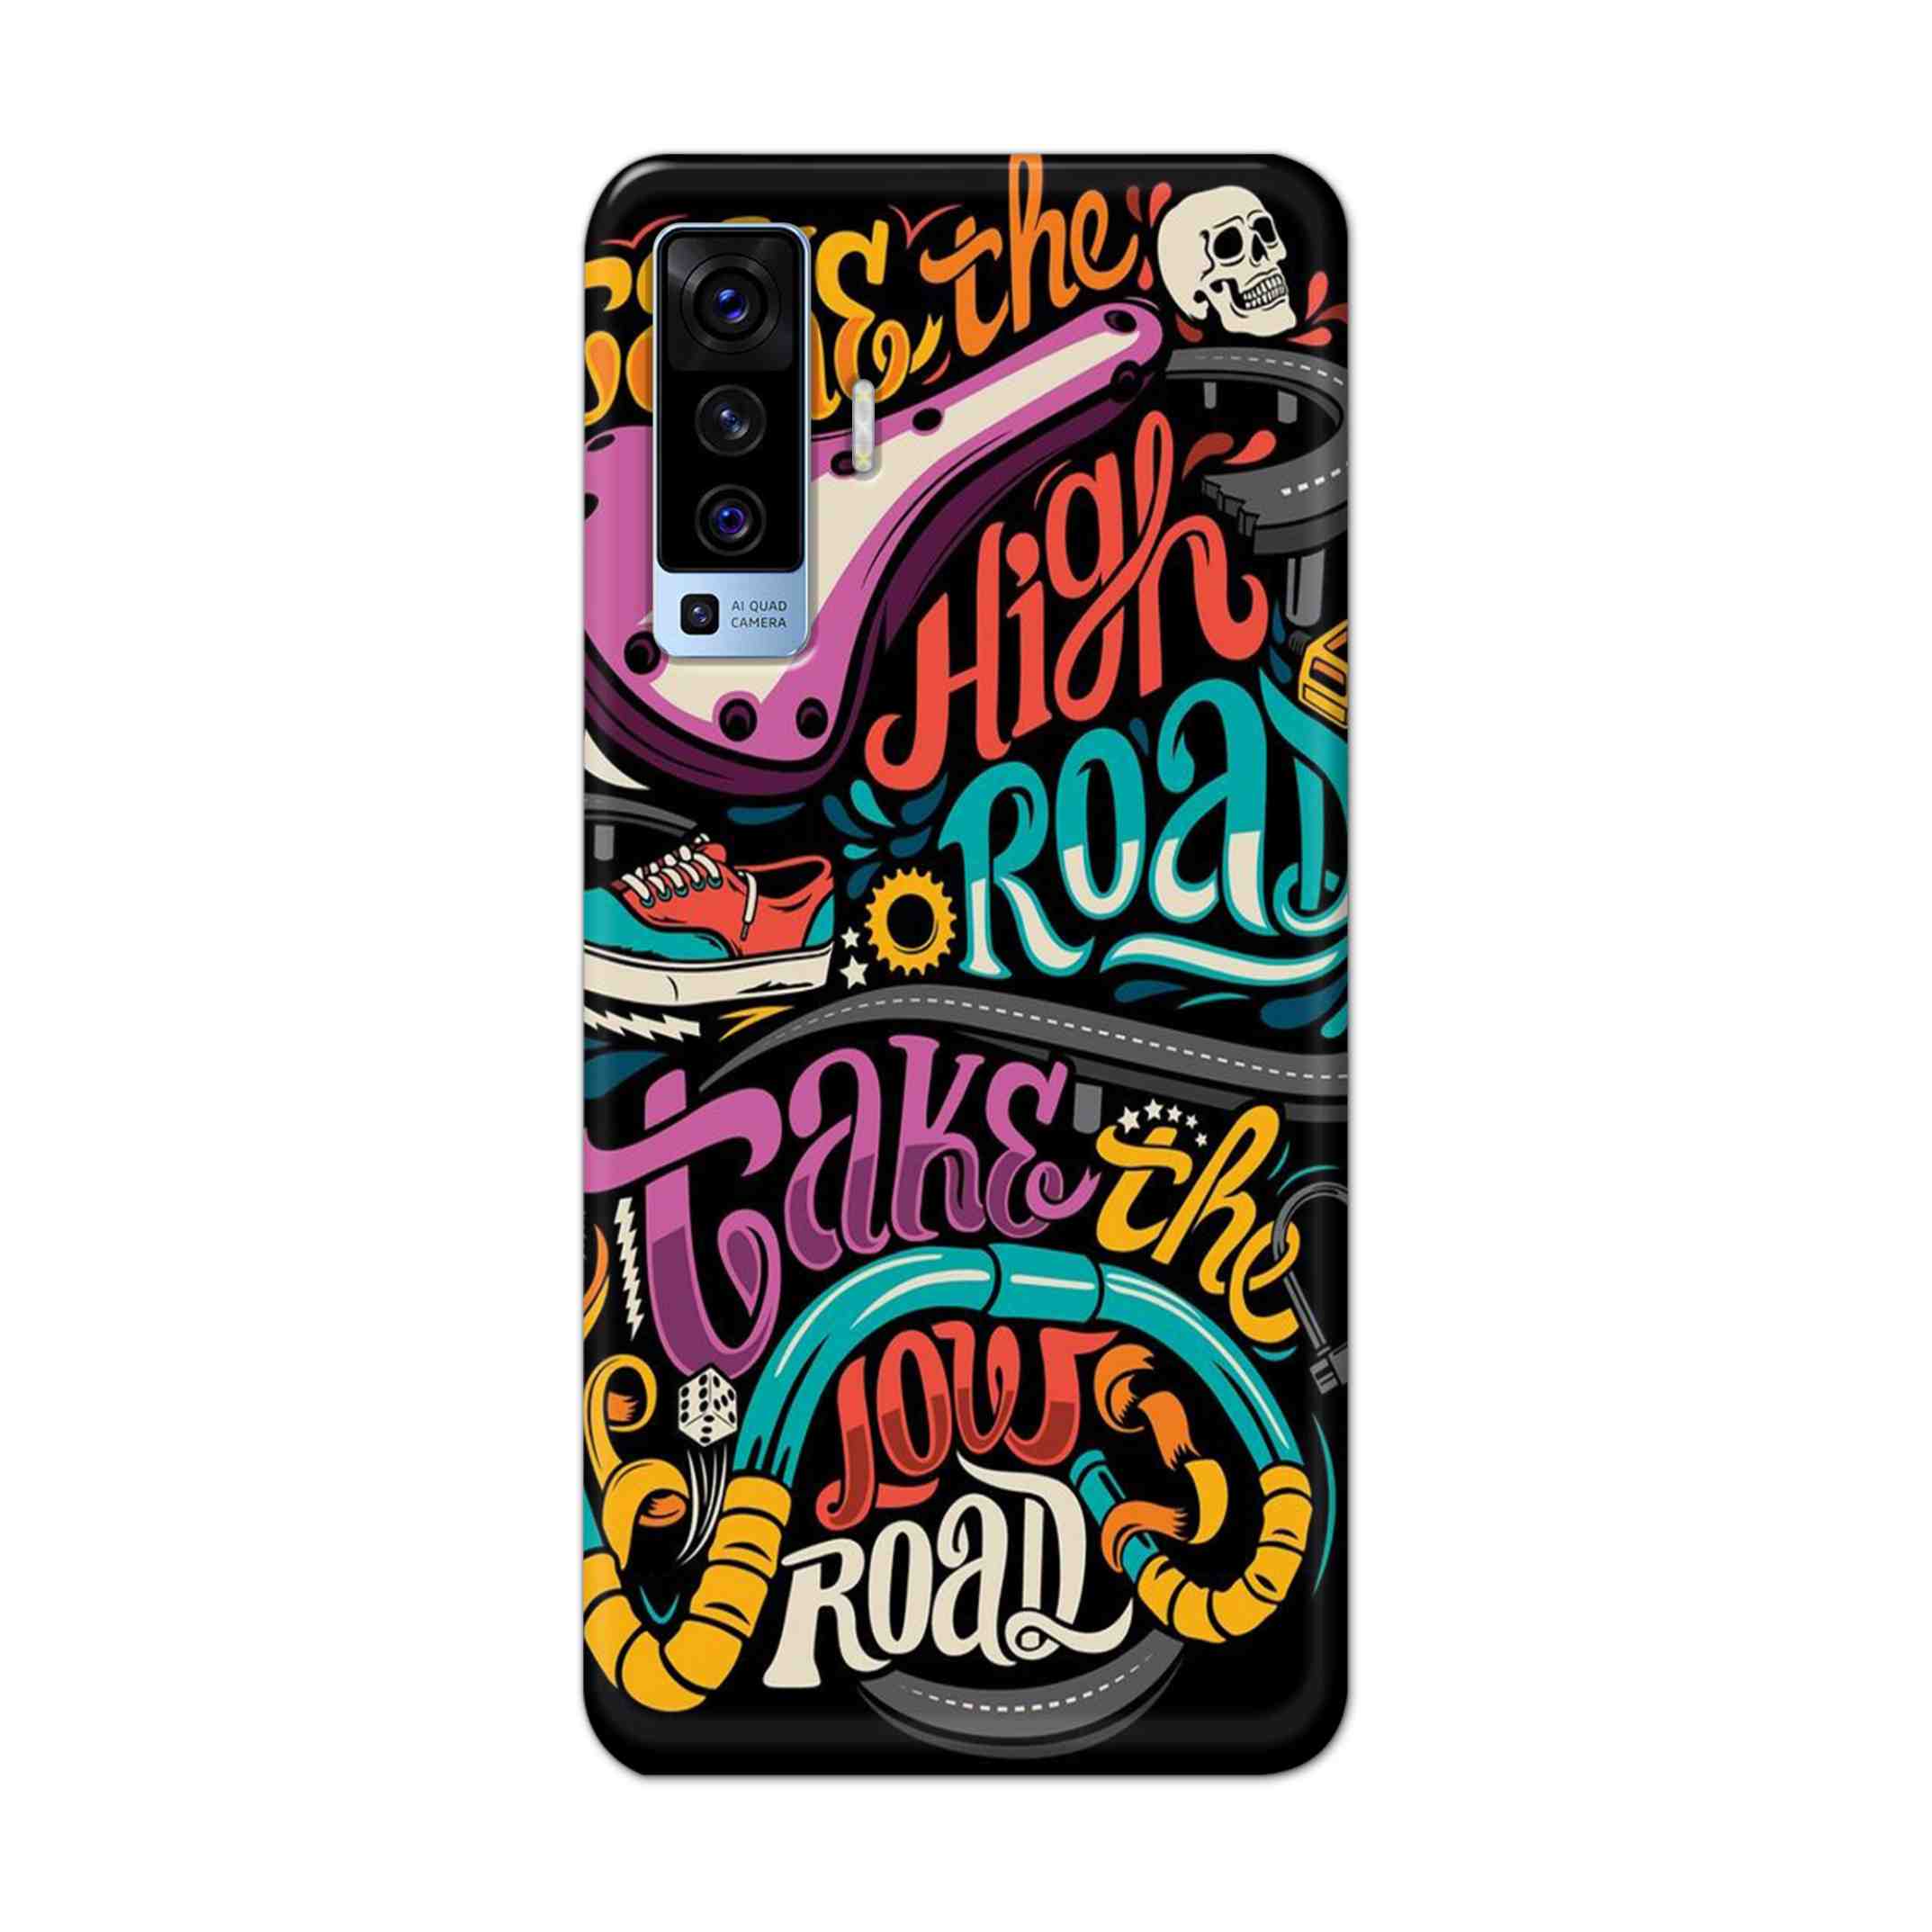 Buy Take The High Road Hard Back Mobile Phone Case Cover For Vivo X50 Online